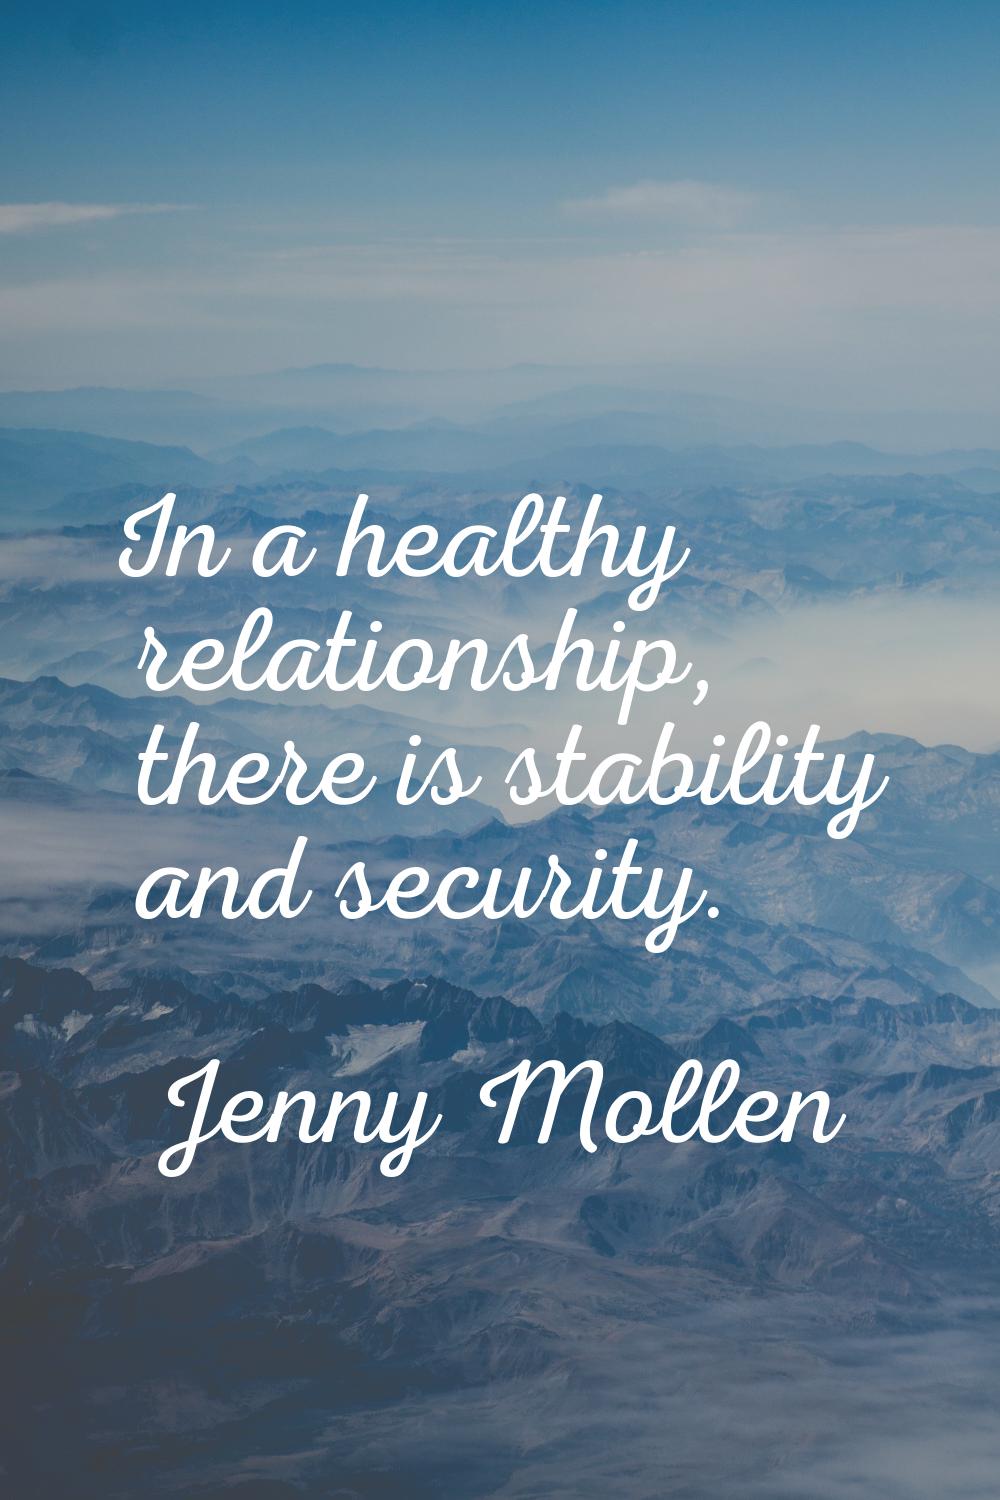 In a healthy relationship, there is stability and security.